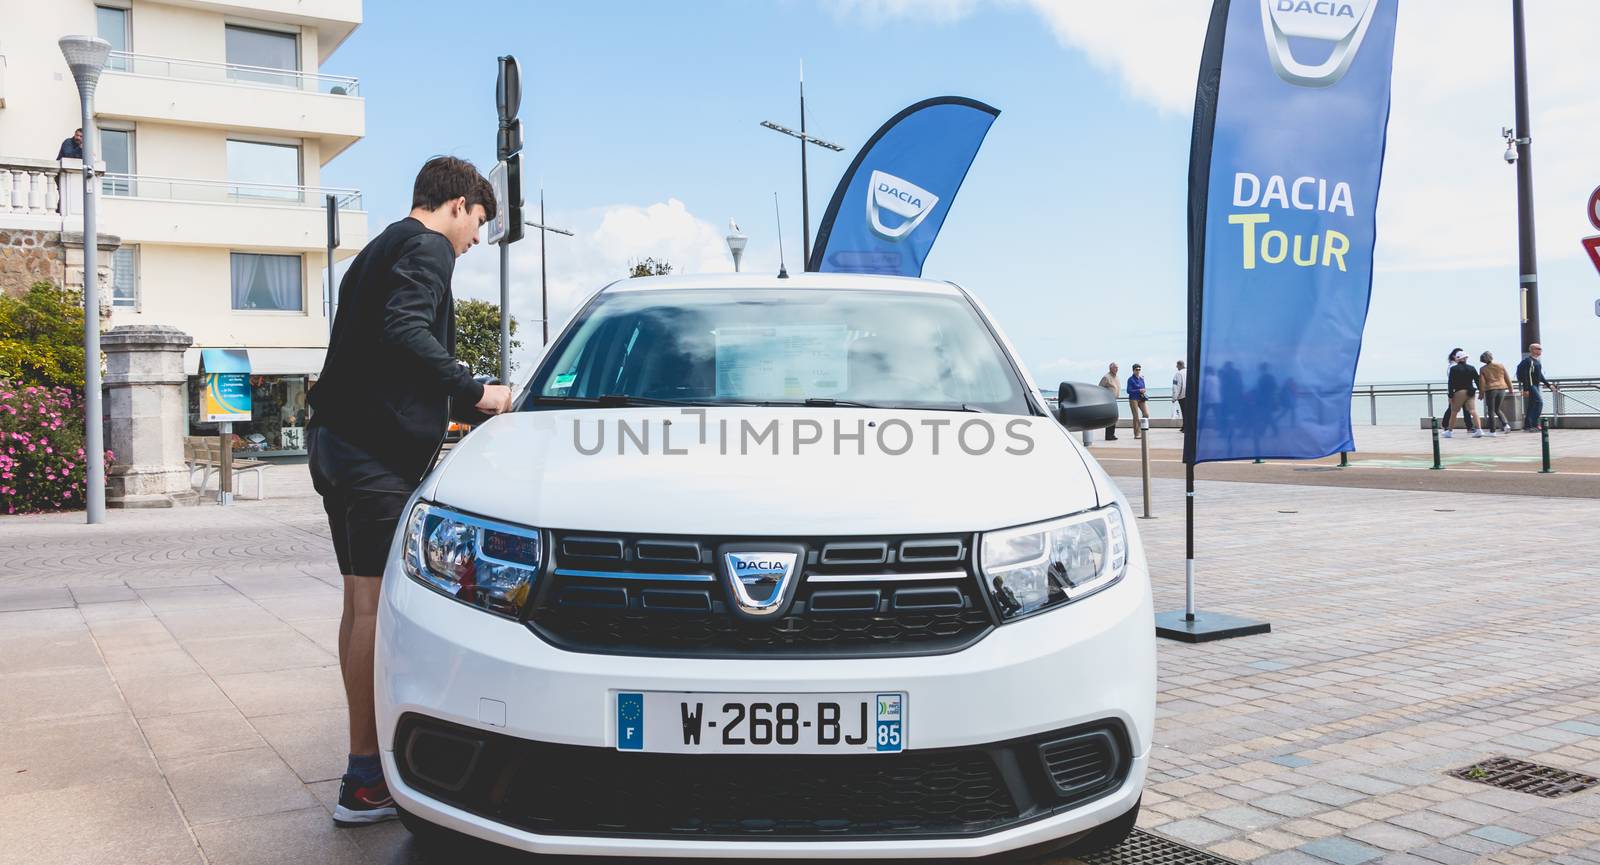 Sables d Olonnes, France - May 07, 2017 : Dacia Tour 2017 is a commercial operation organized by the car builder in order to present its cars throughout France - A young man watching a car